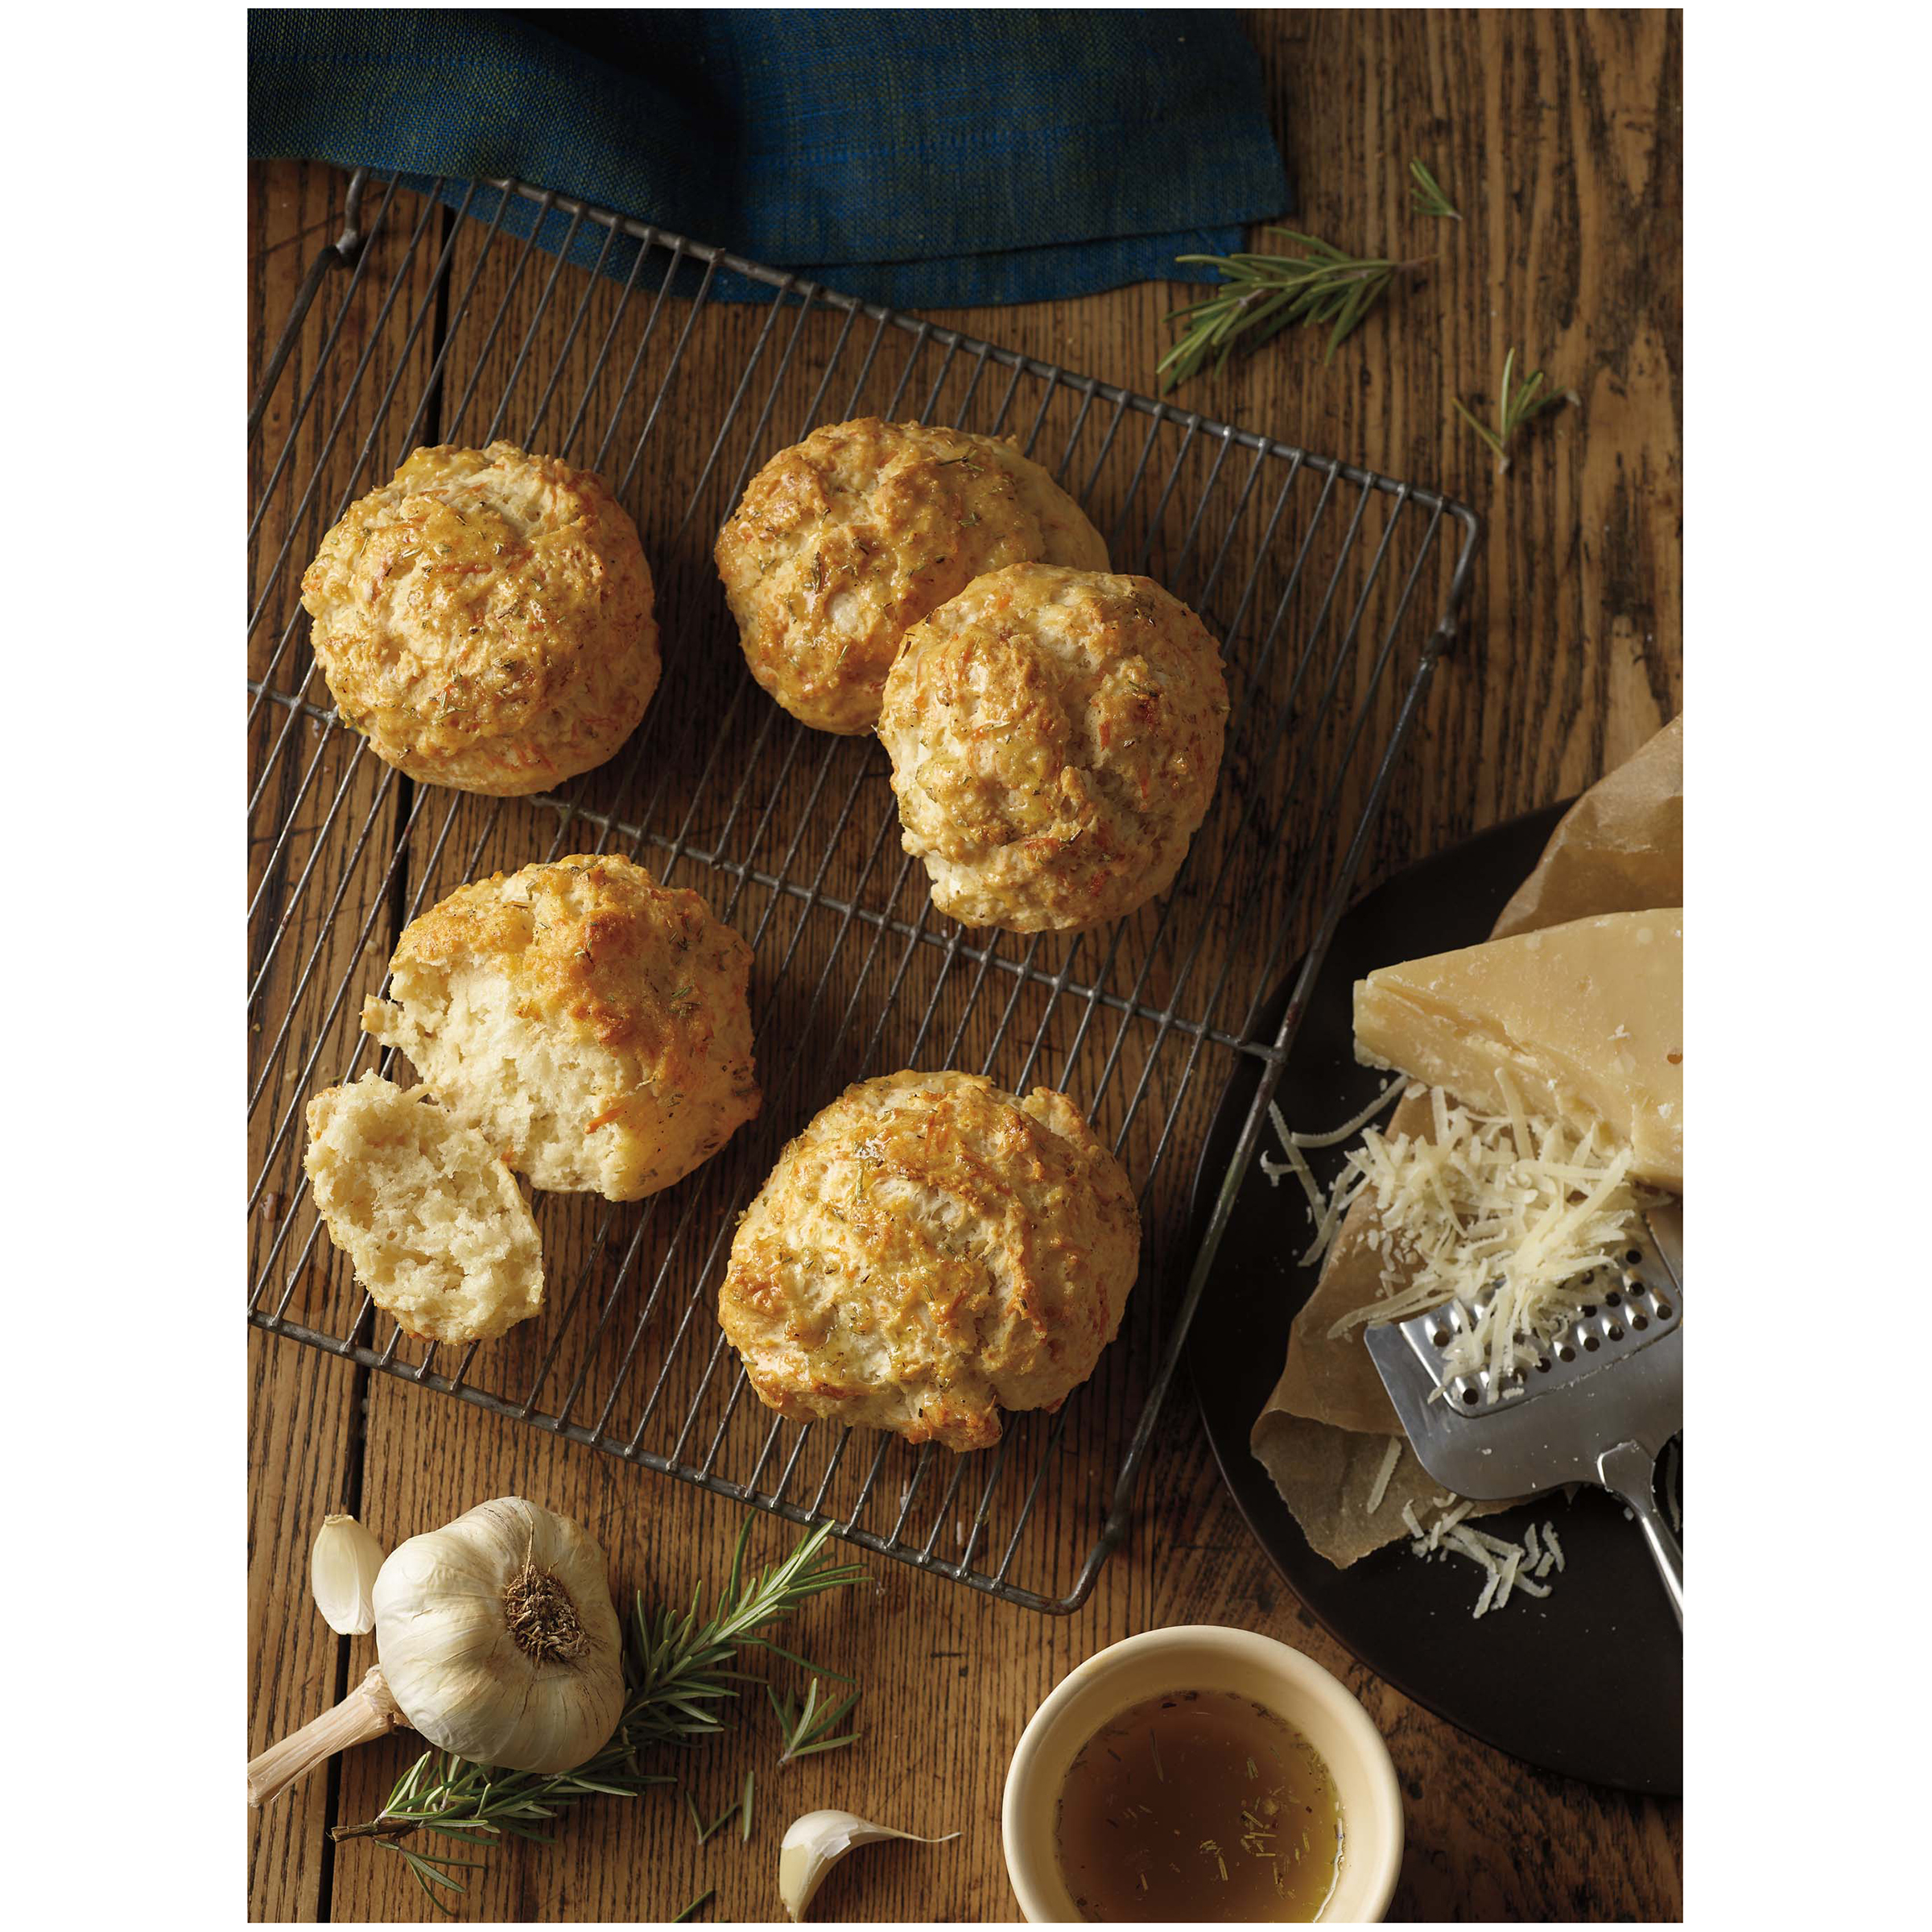 Red Lobster Cheddar Bay Biscuit Mix, Gluten-Free, 11.36 oz Box - image 4 of 7